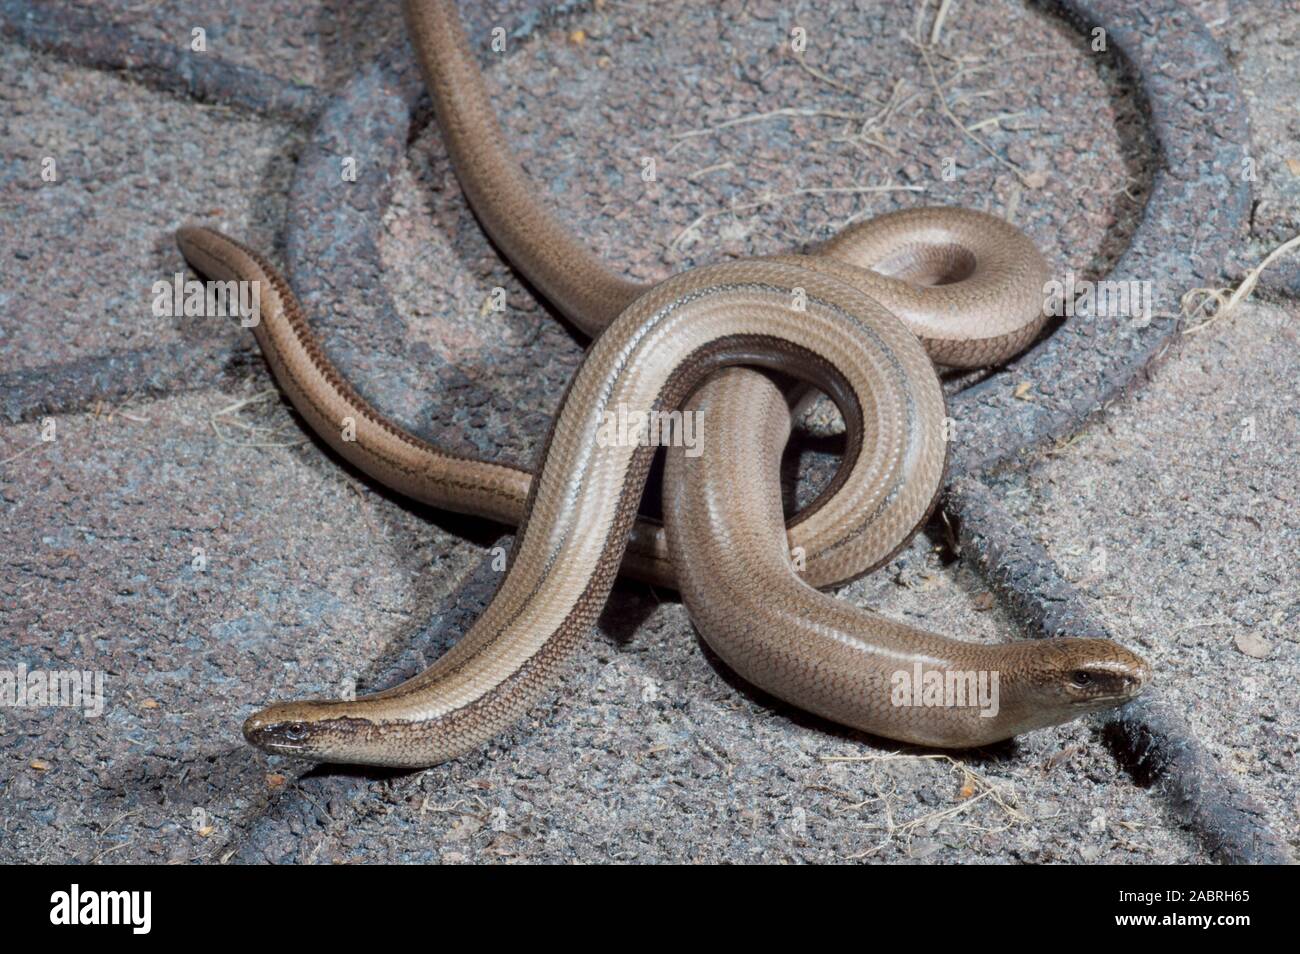 Slow Worms Pair Anguis Fragilis Female Head Left Male Right On